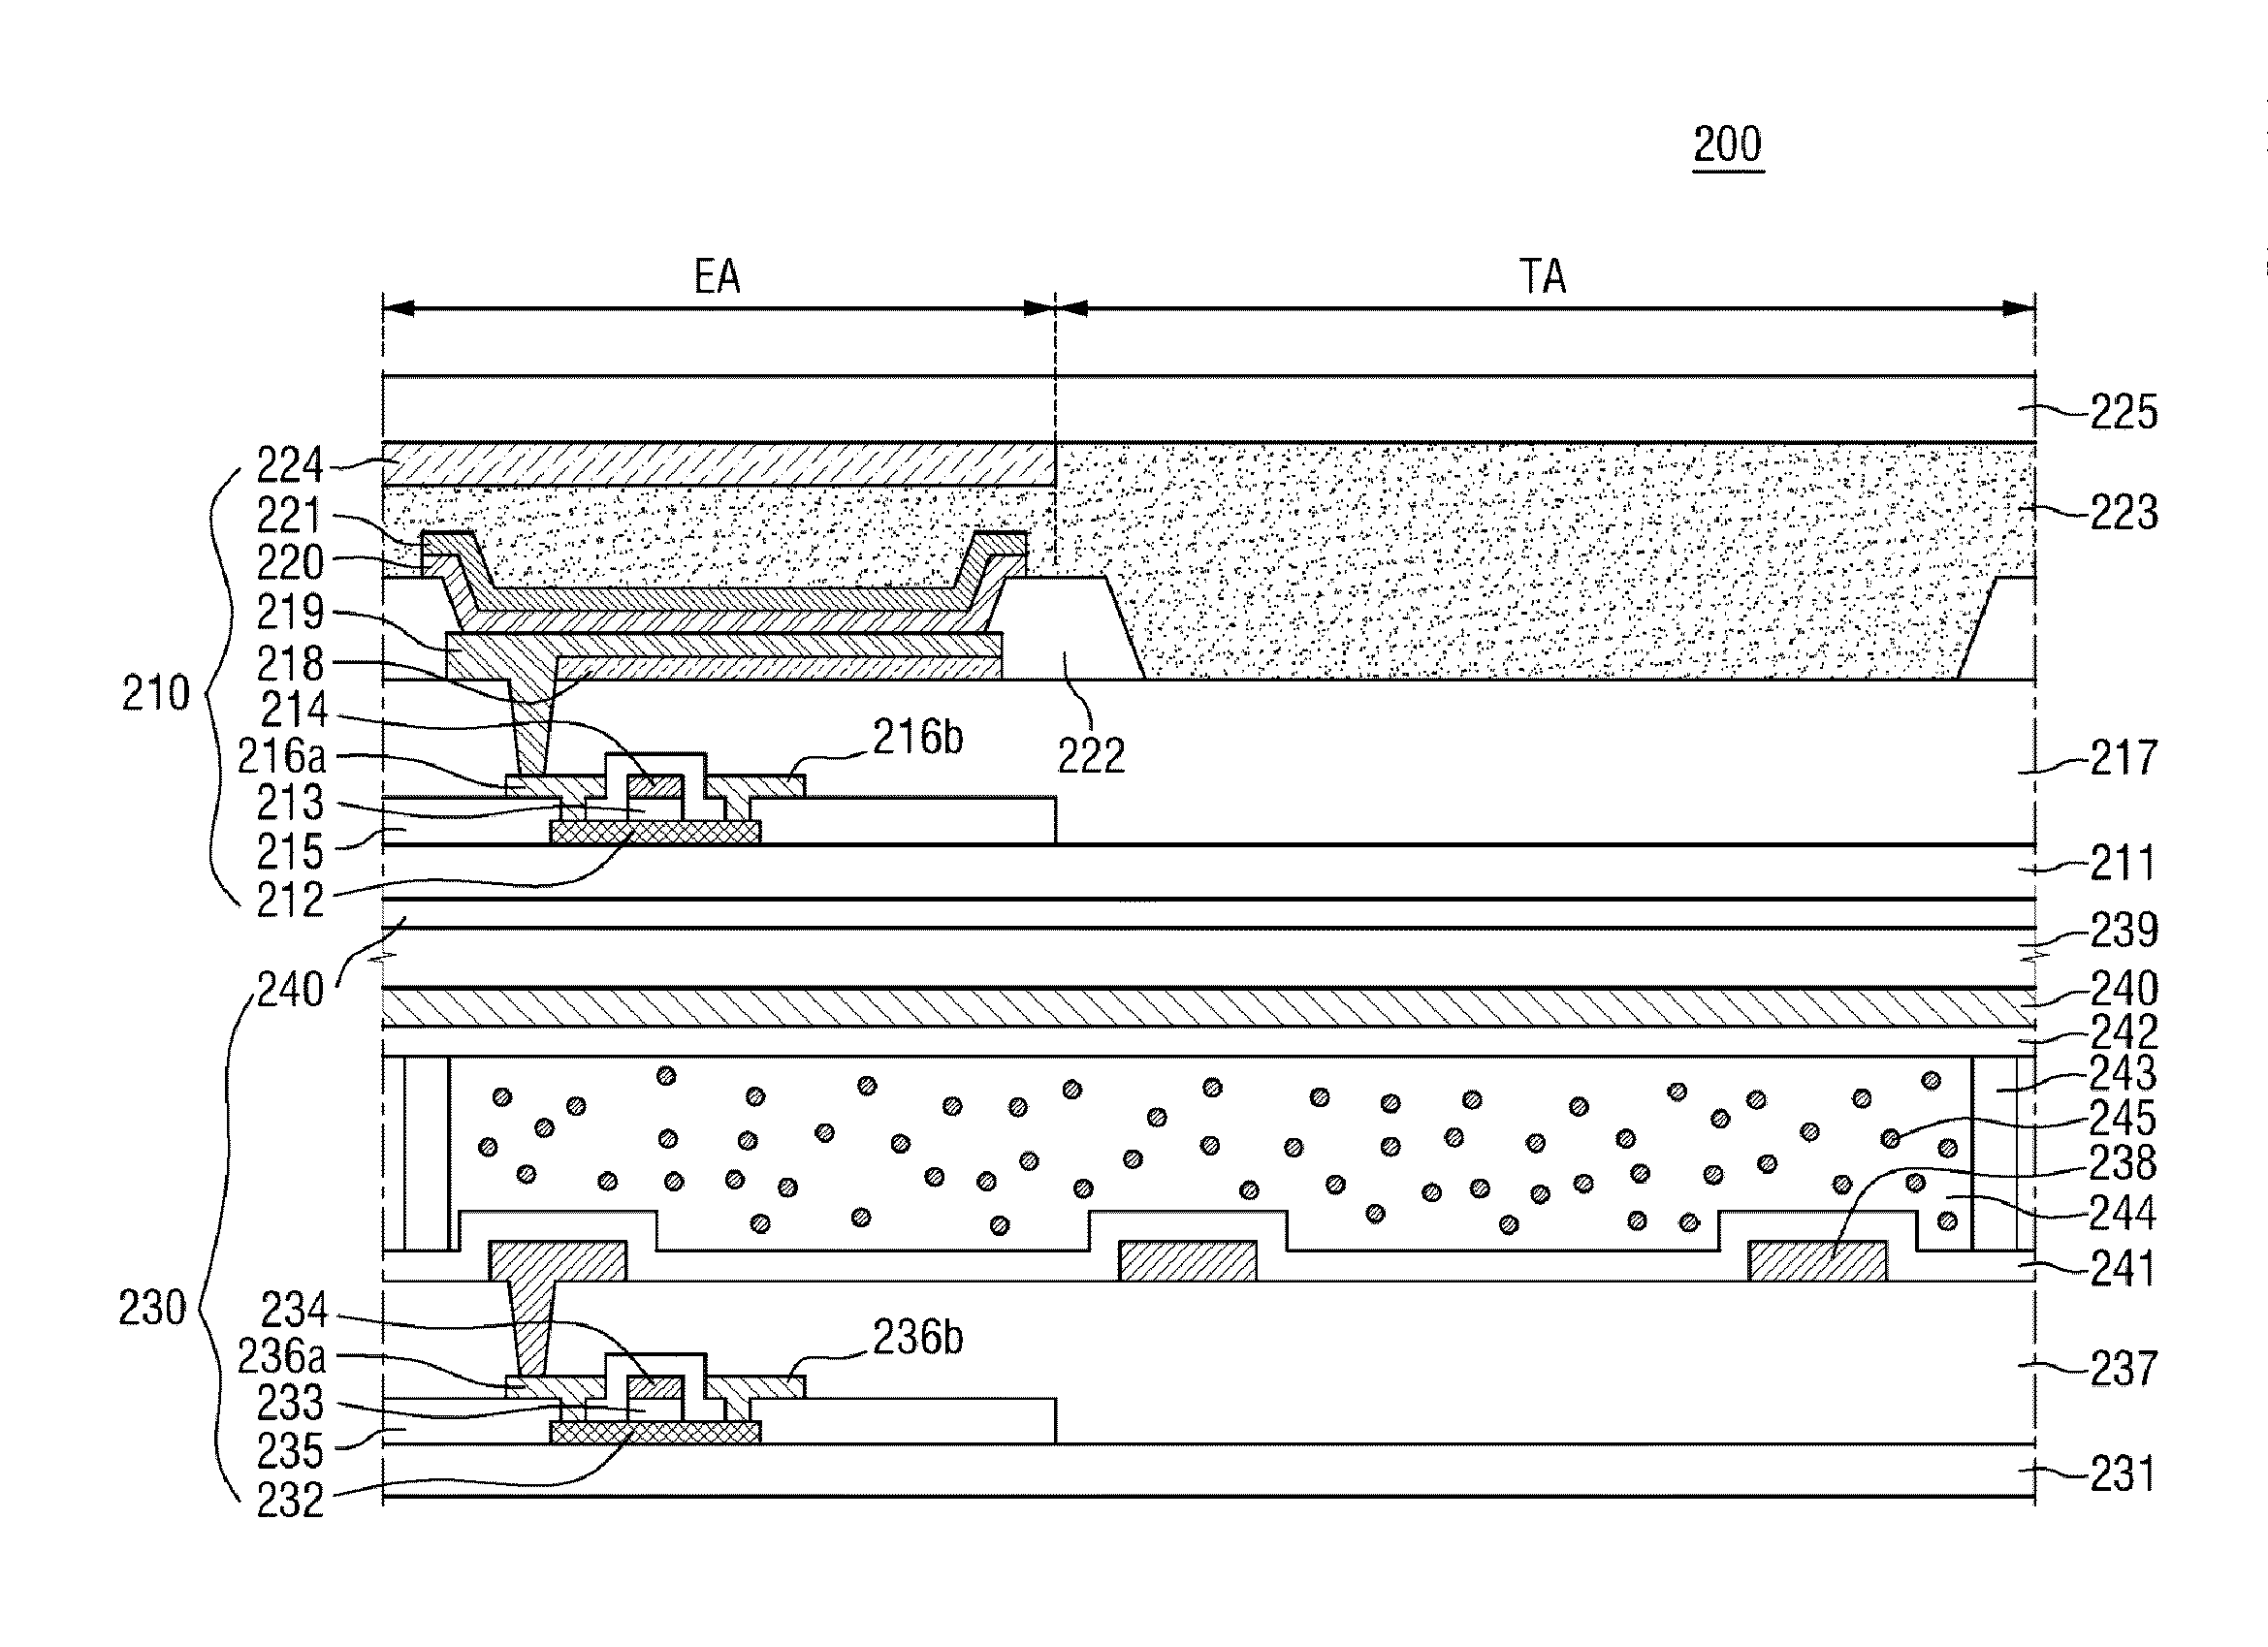 Transparent display apparatus and a method for controlling the same